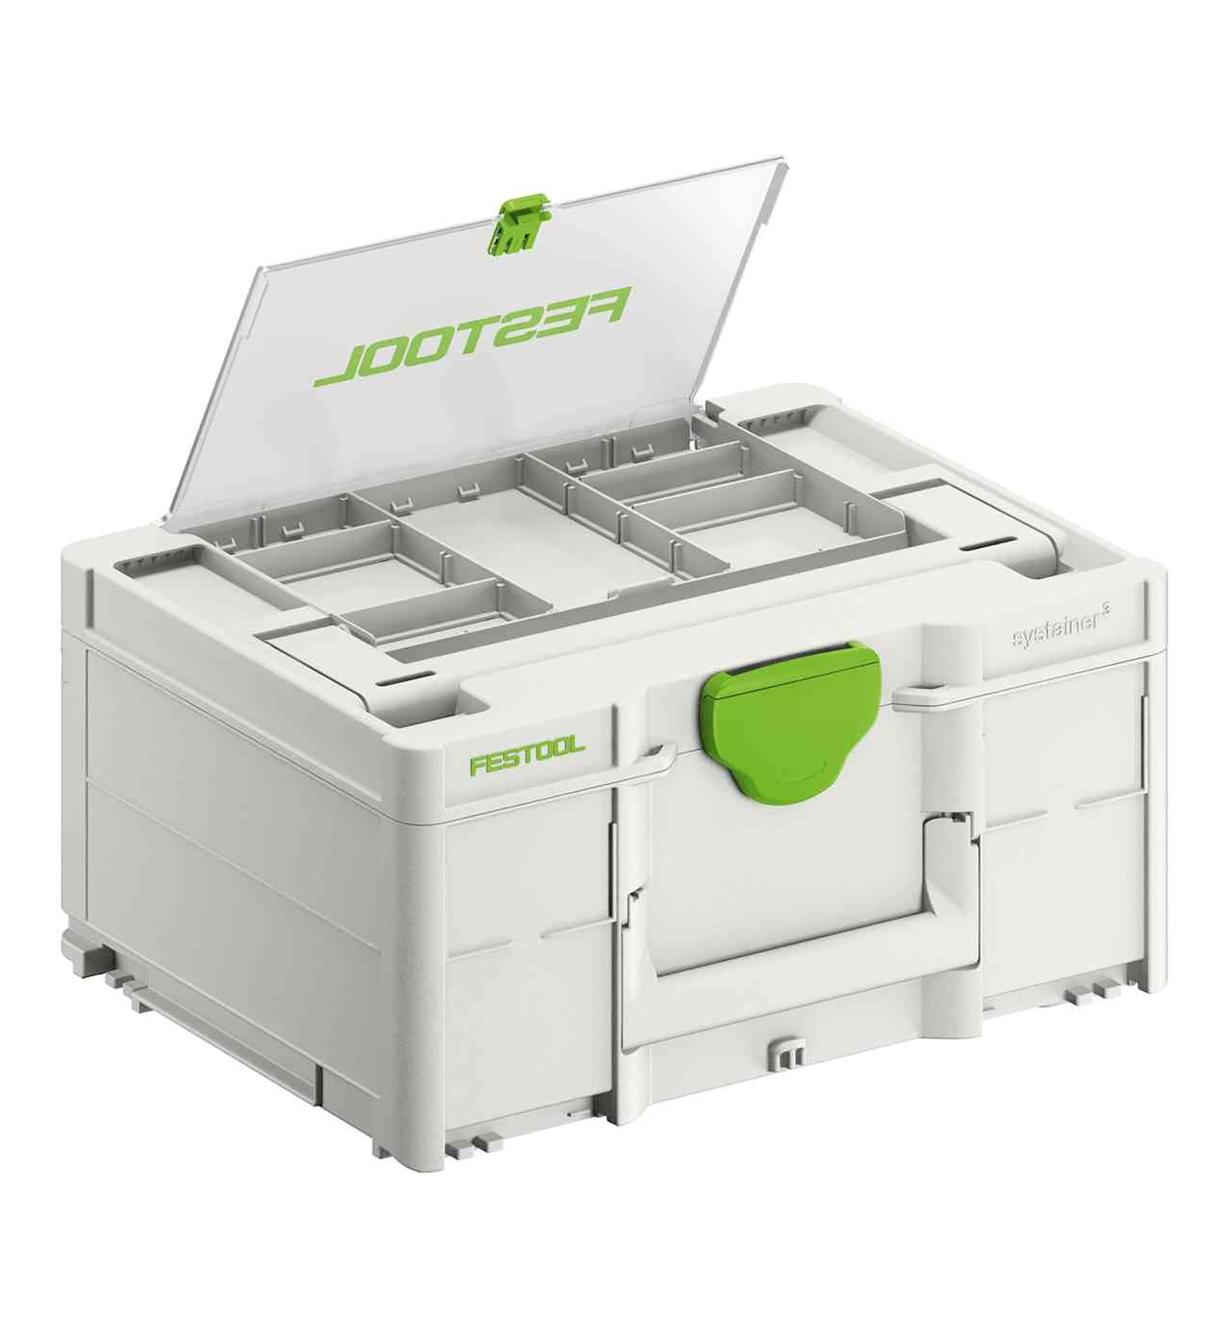 ZA577347 - Festool Systainer³ SYS3 M187